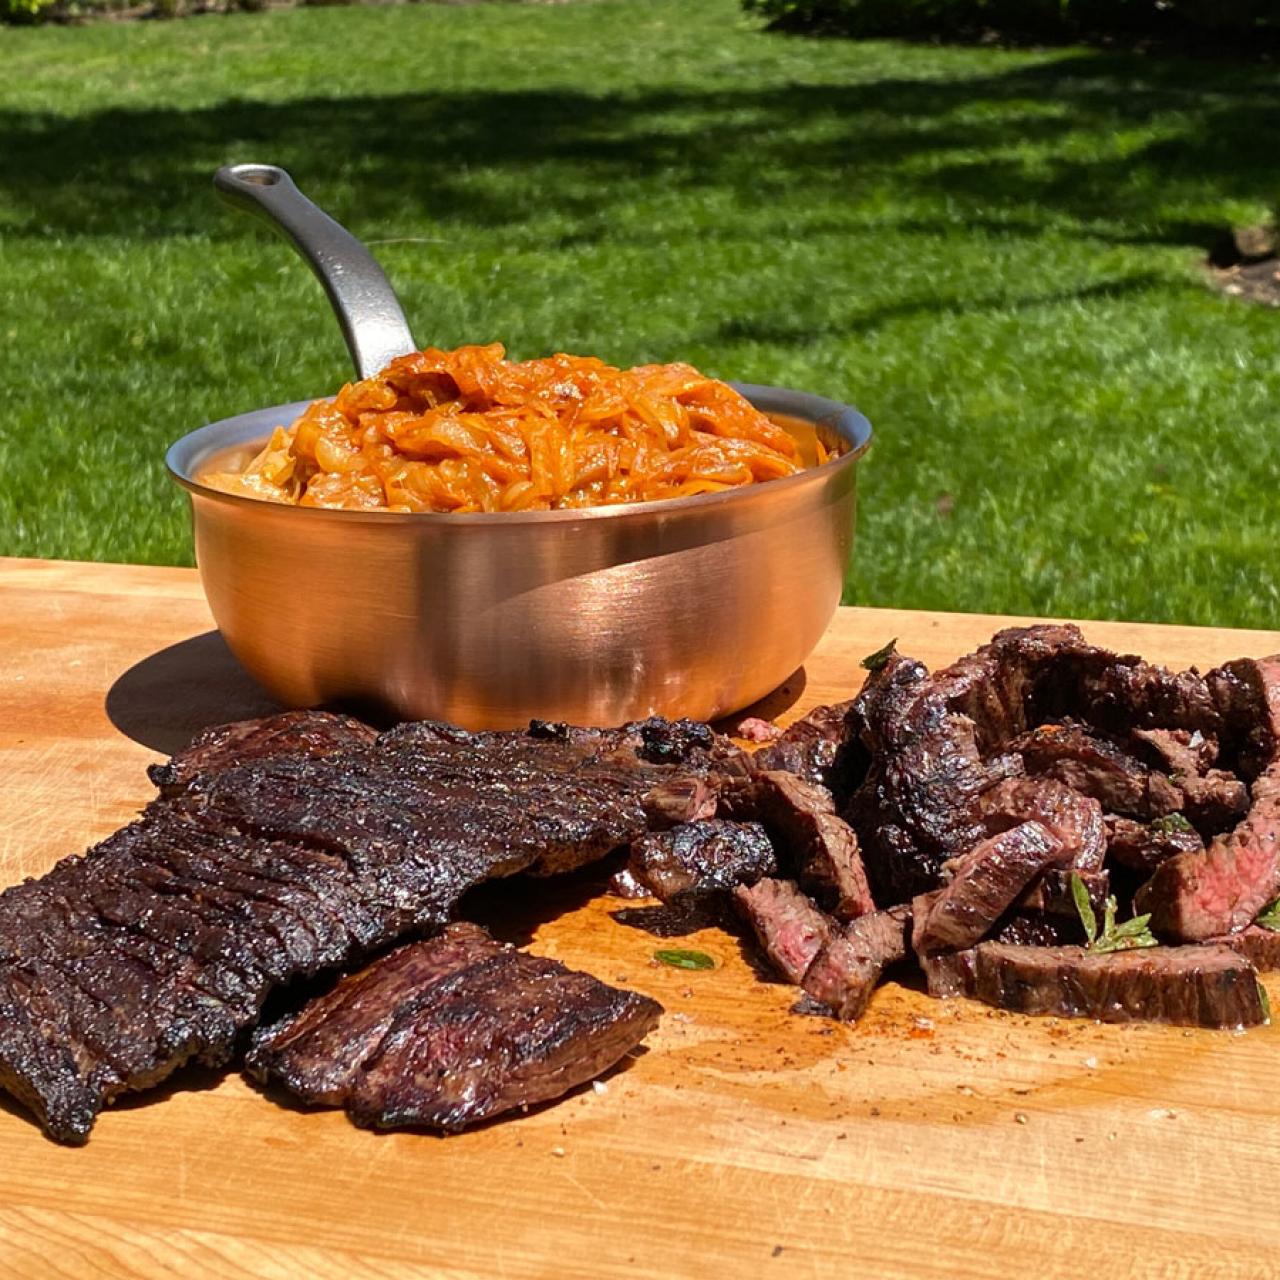 https://food.fnr.sndimg.com/content/dam/images/food/fullset/2020/06/24/8665986_grilled-skirt-steak-with-sticky-barbecue-onions_s4x3.jpg.rend.hgtvcom.1280.1280.suffix/1593014090815.jpeg